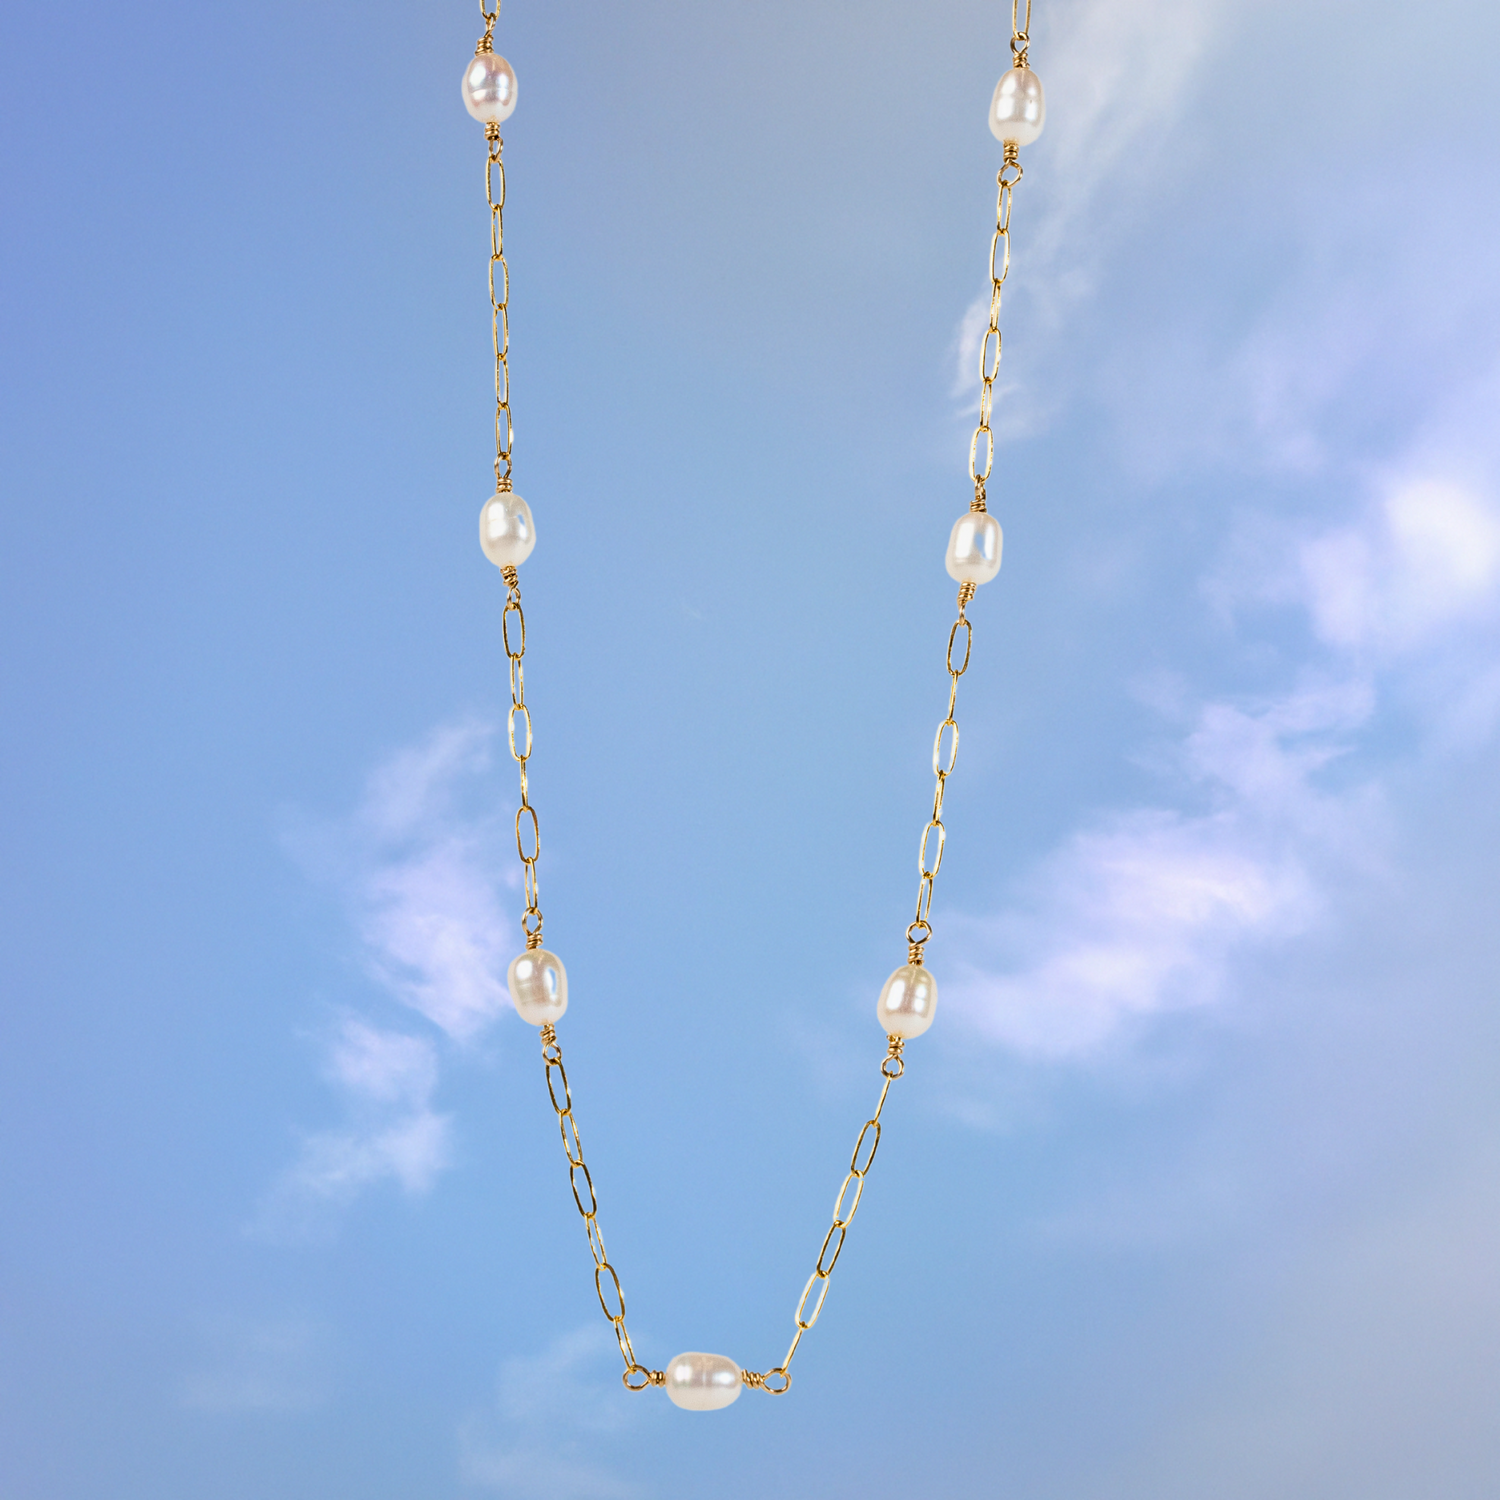 Pearl Station Necklace by Quinney Collection 14k Gold Filled jewelry. Made in Victoria BC Canada